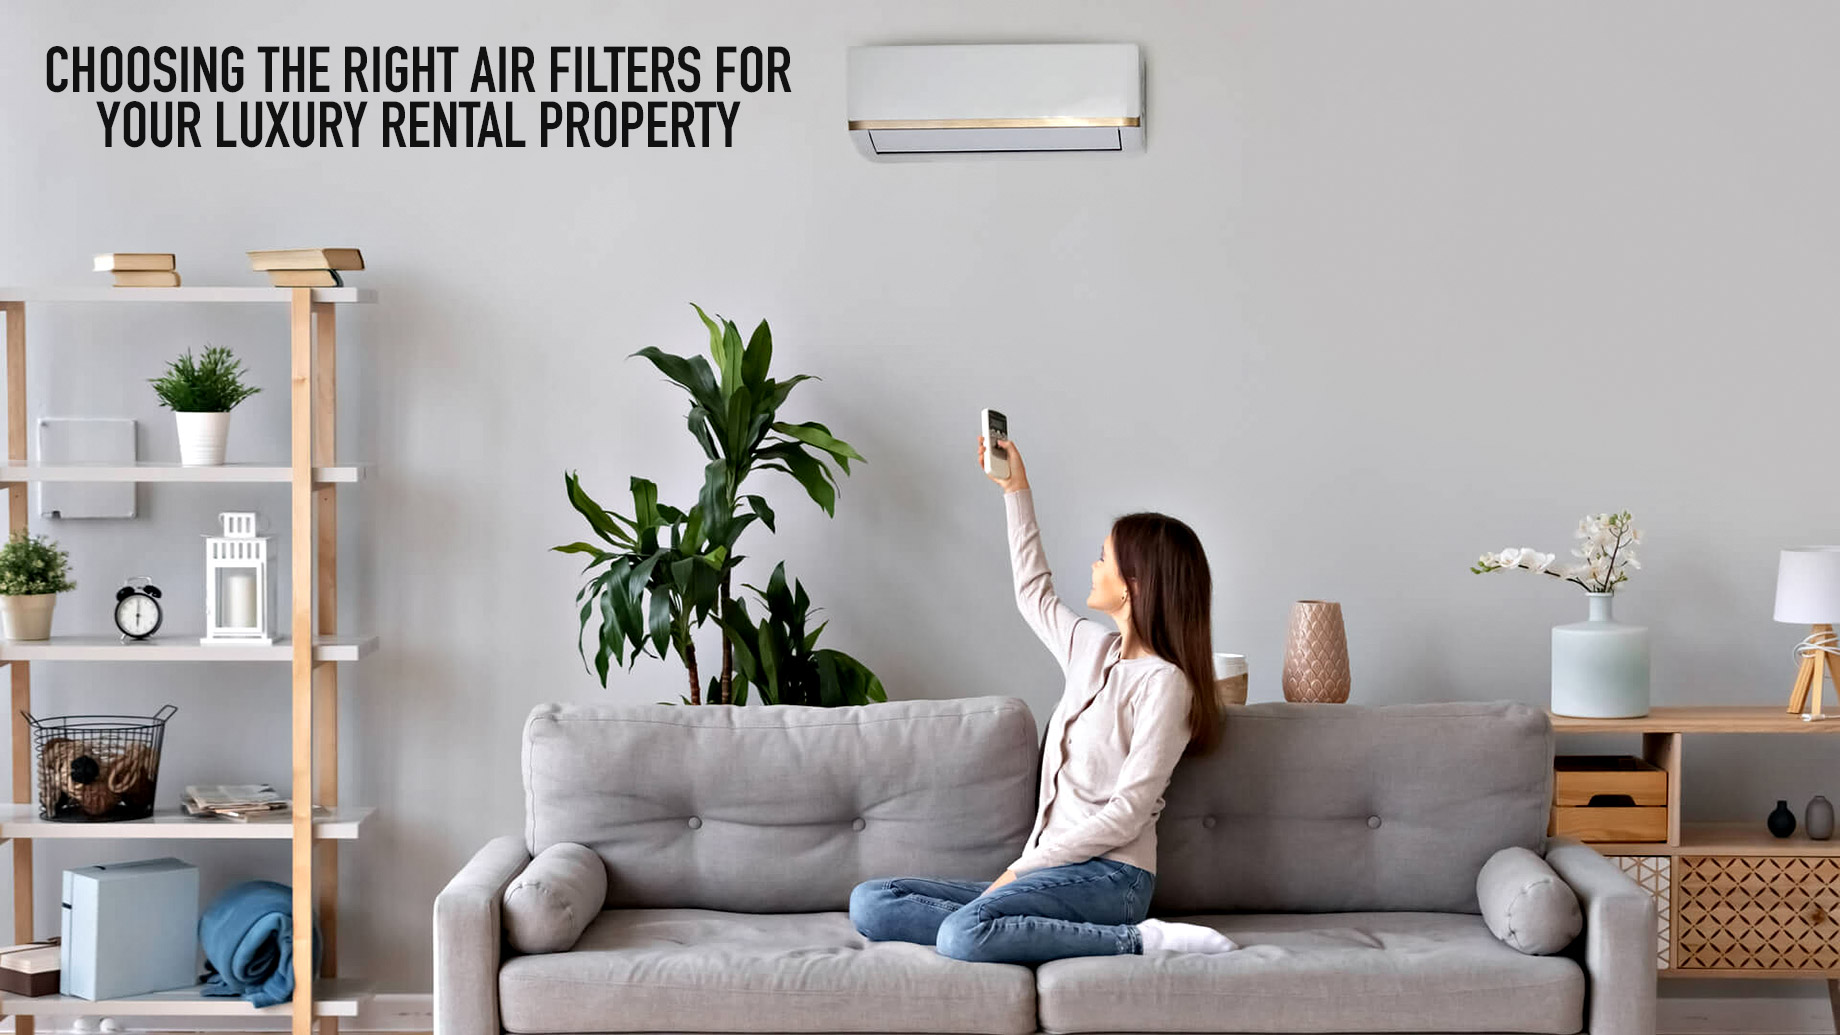 Choosing the Right Air Filters for Your Luxury Rental Property